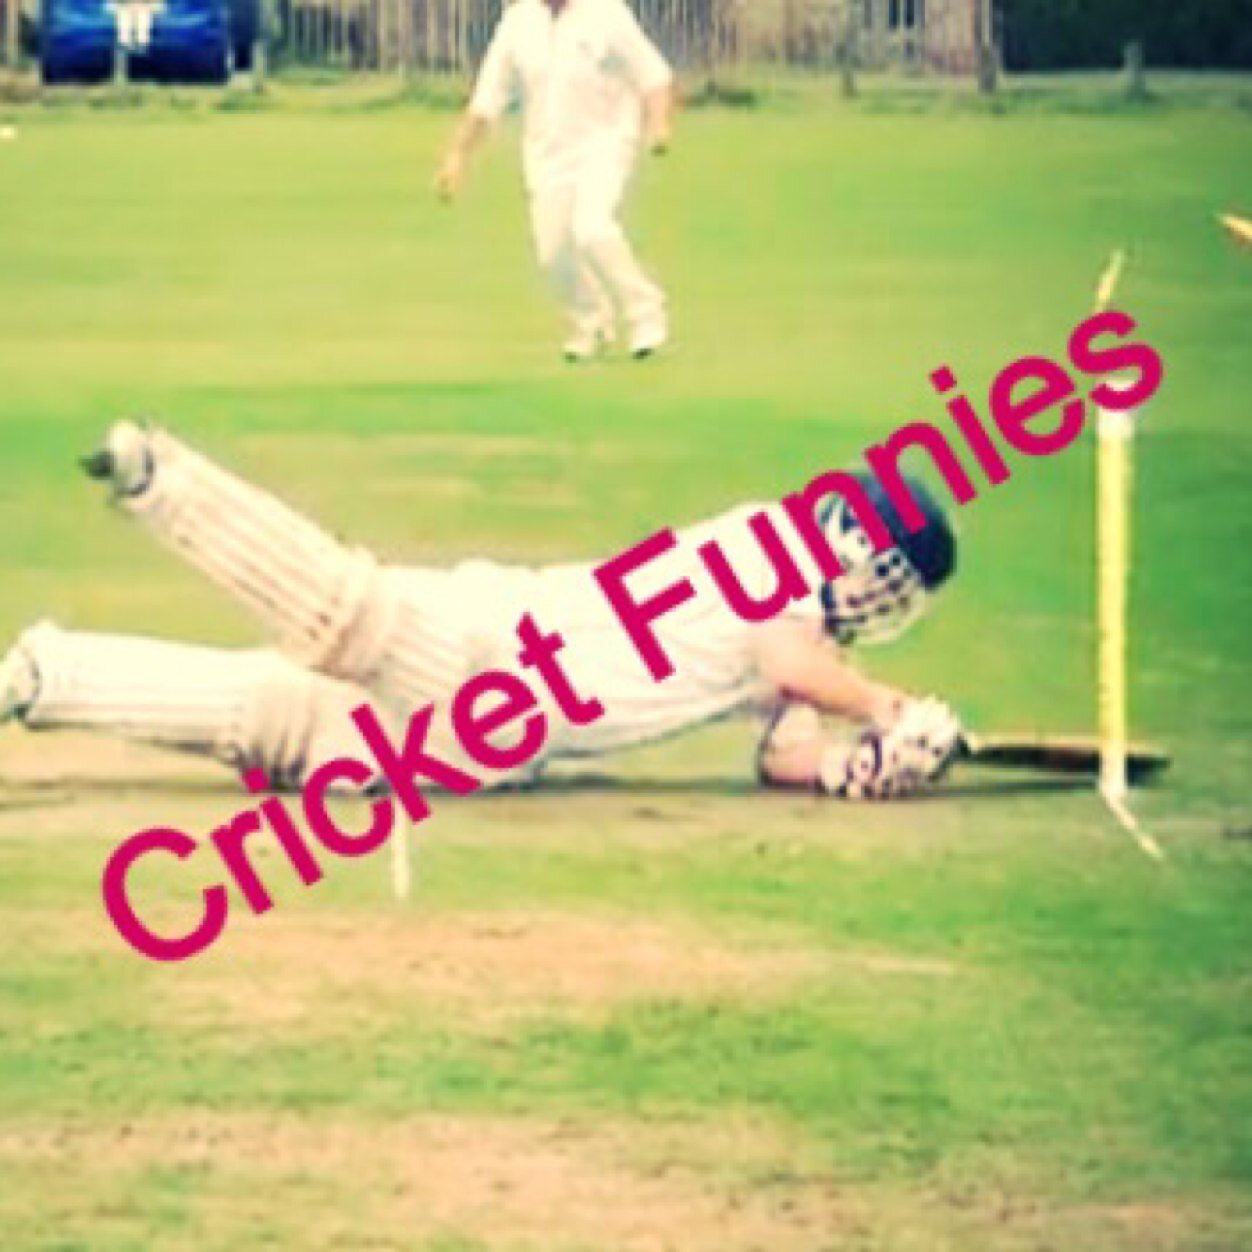 Got a funny photo, video or story to share from your local/village cricket side? Submit your entries to cricketfunnies@outlook.com